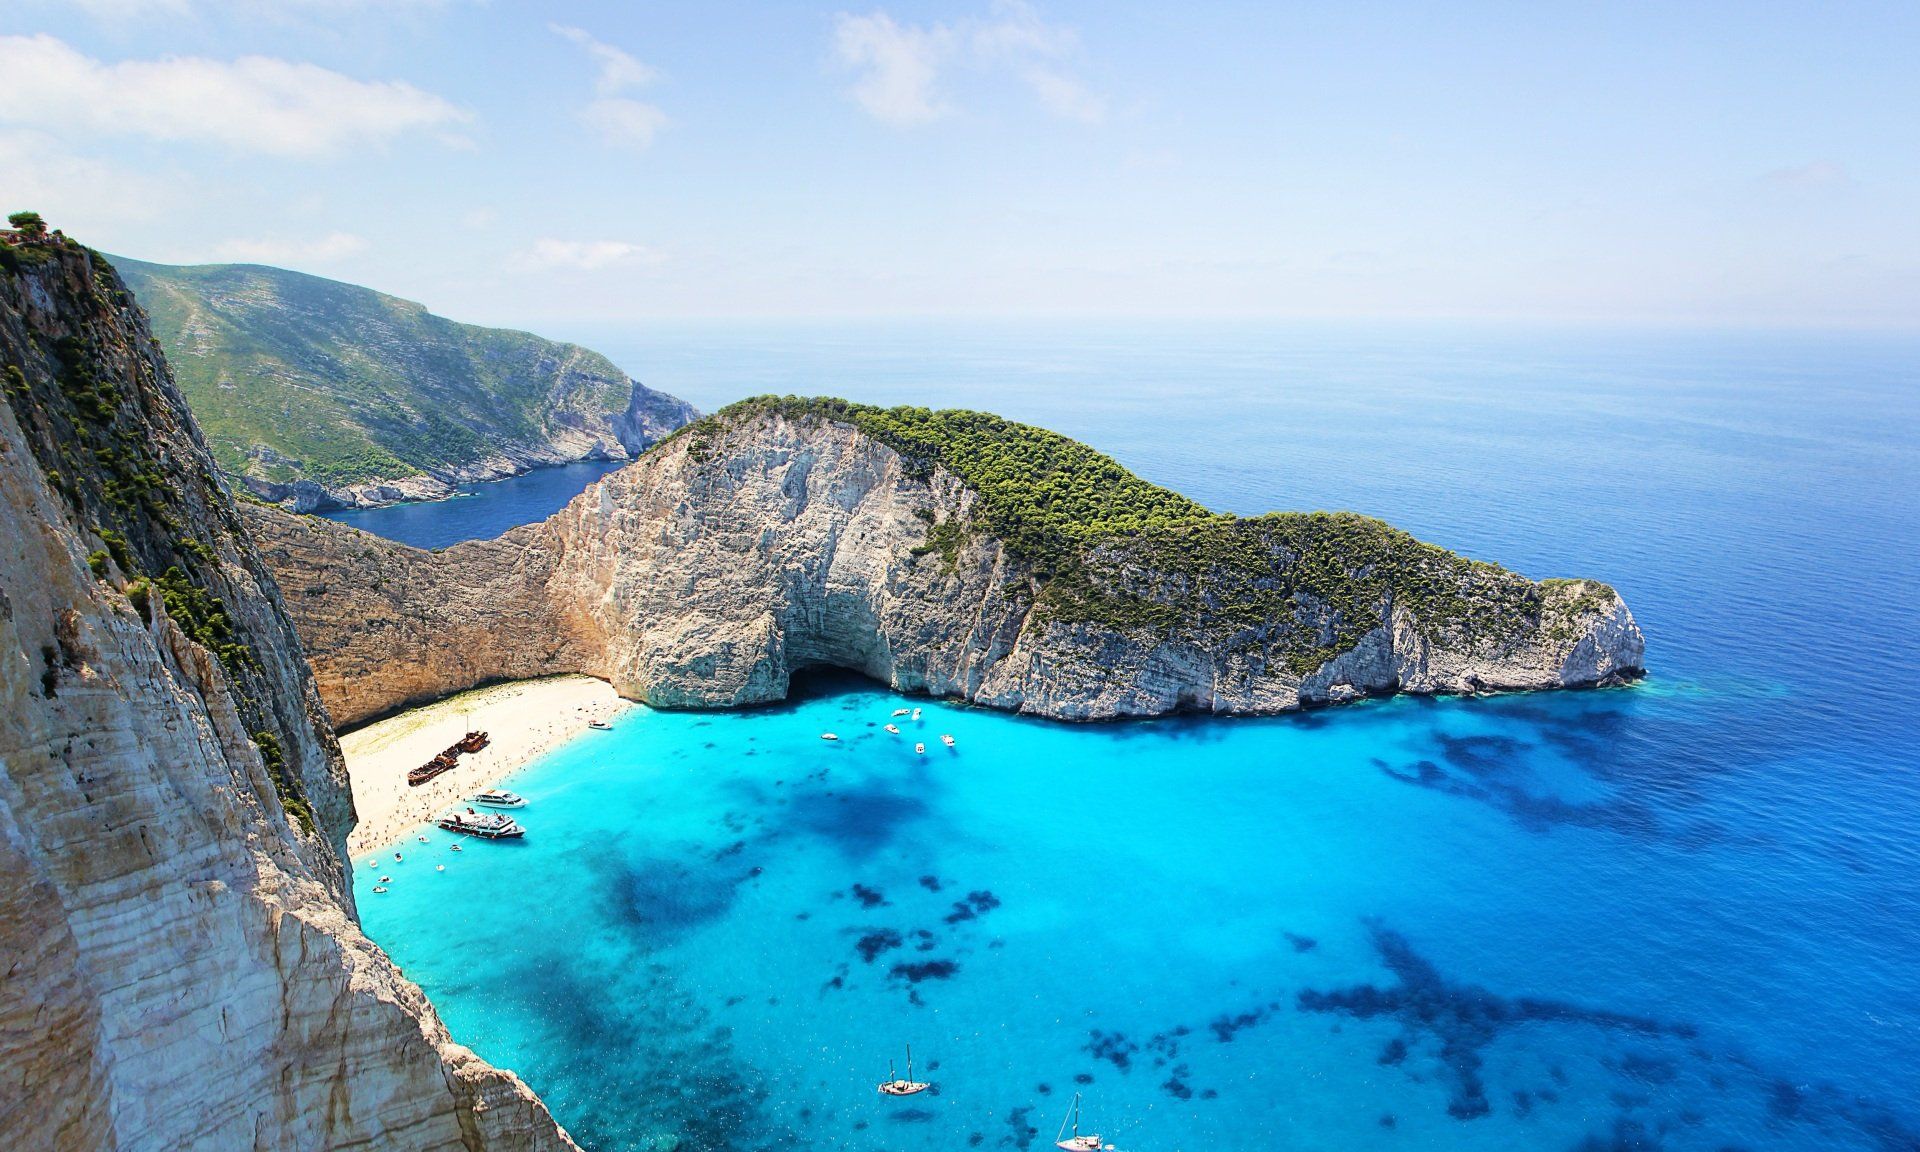 Top View of Navagio Beach, Shipwreck Beach, Agios Georgios, Exposed Cove, Smugglers Cove, on the Coast of Zakynthos, in the Lonian Islands of Greece - Greece Holidays Barter's Travelnet